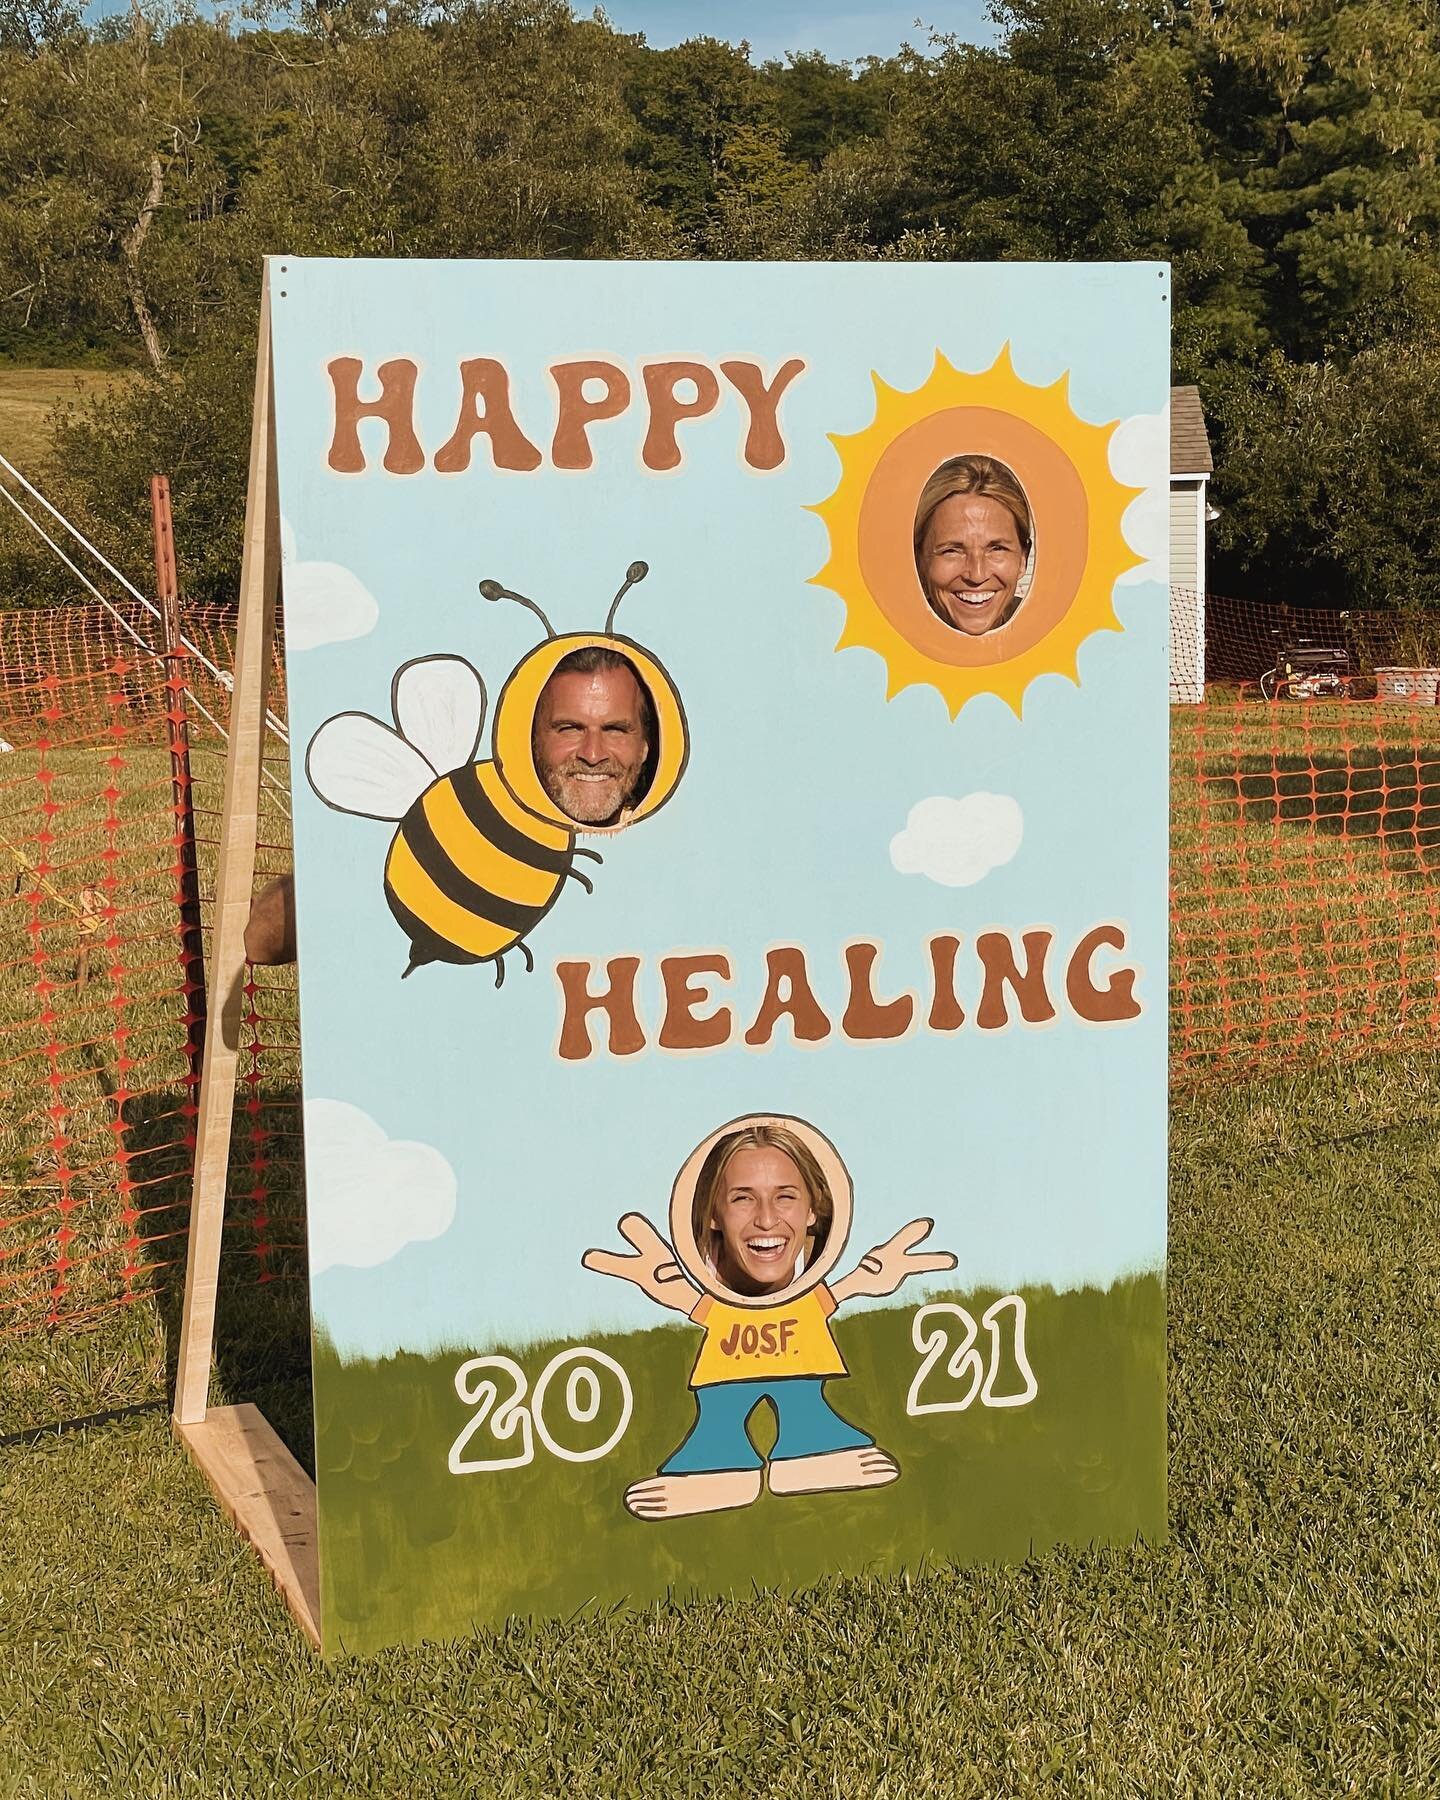 @toreistori and I had so much fun painting this cutout board. 

And I am the luckiest kid in the world to call these two goofballs my parents. 

_
📷: @toreistori 
#happyhealingfestival #musicfestival #livemusic #cleveland #ohio #outdoormusic